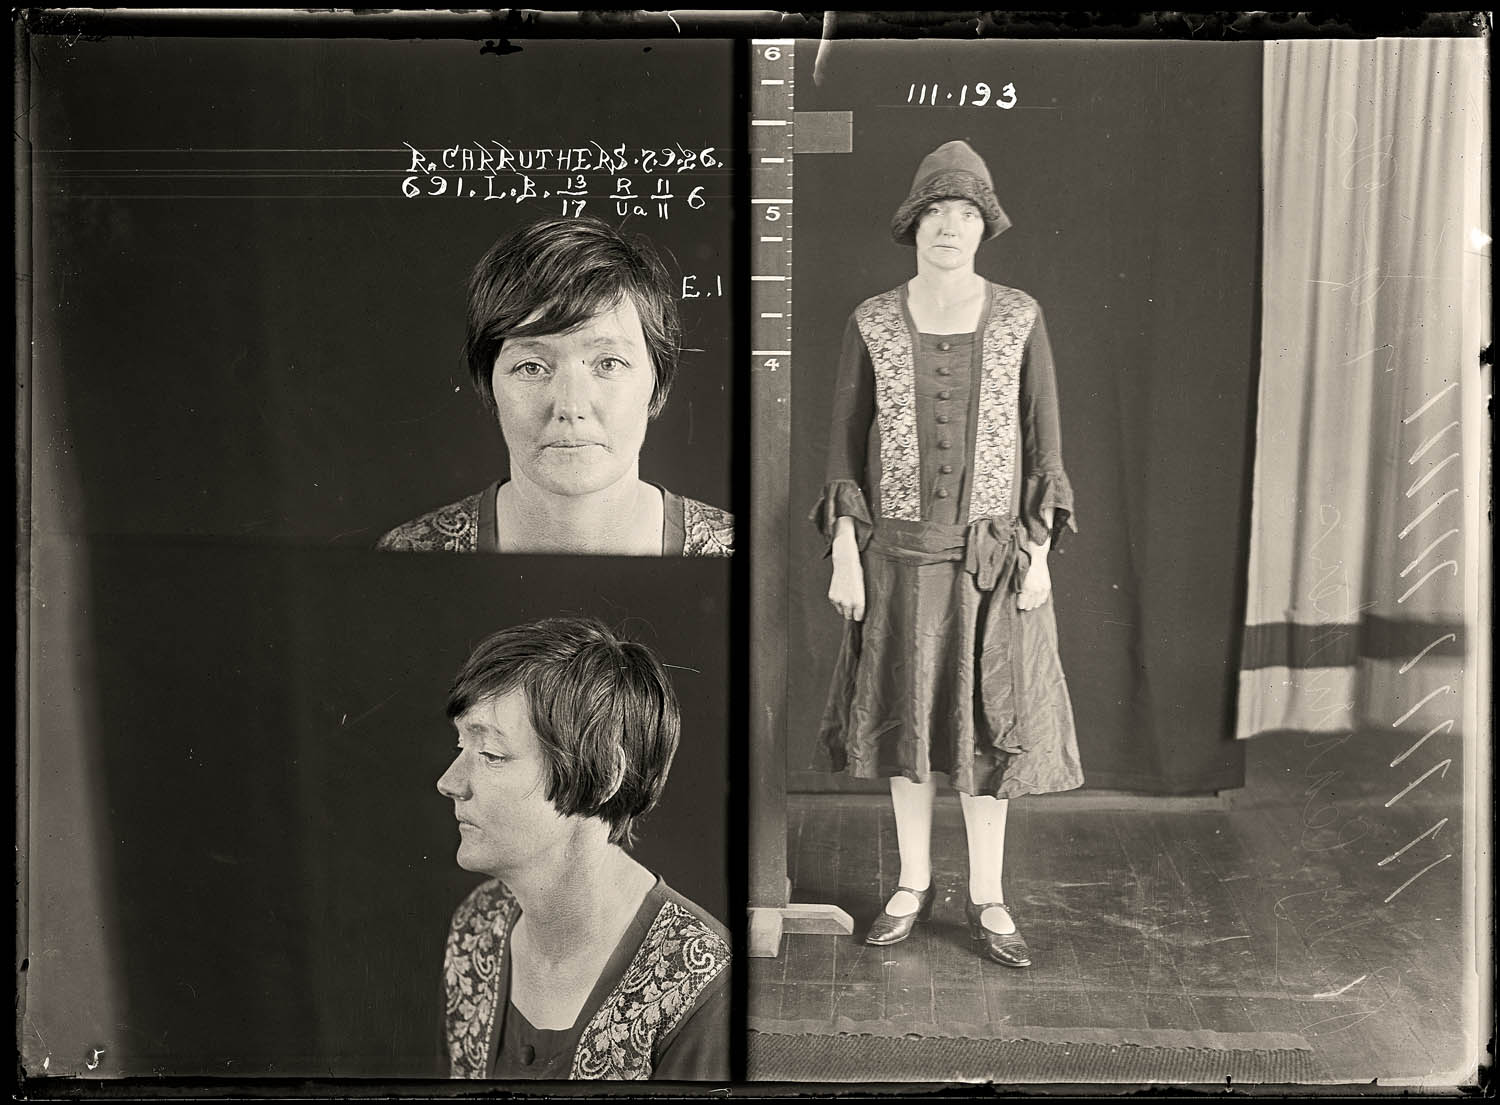 Ruth Carruthers, criminal record number 691LB, 7 September 1926. State Reformatory for Women, Long Bay, NSW 